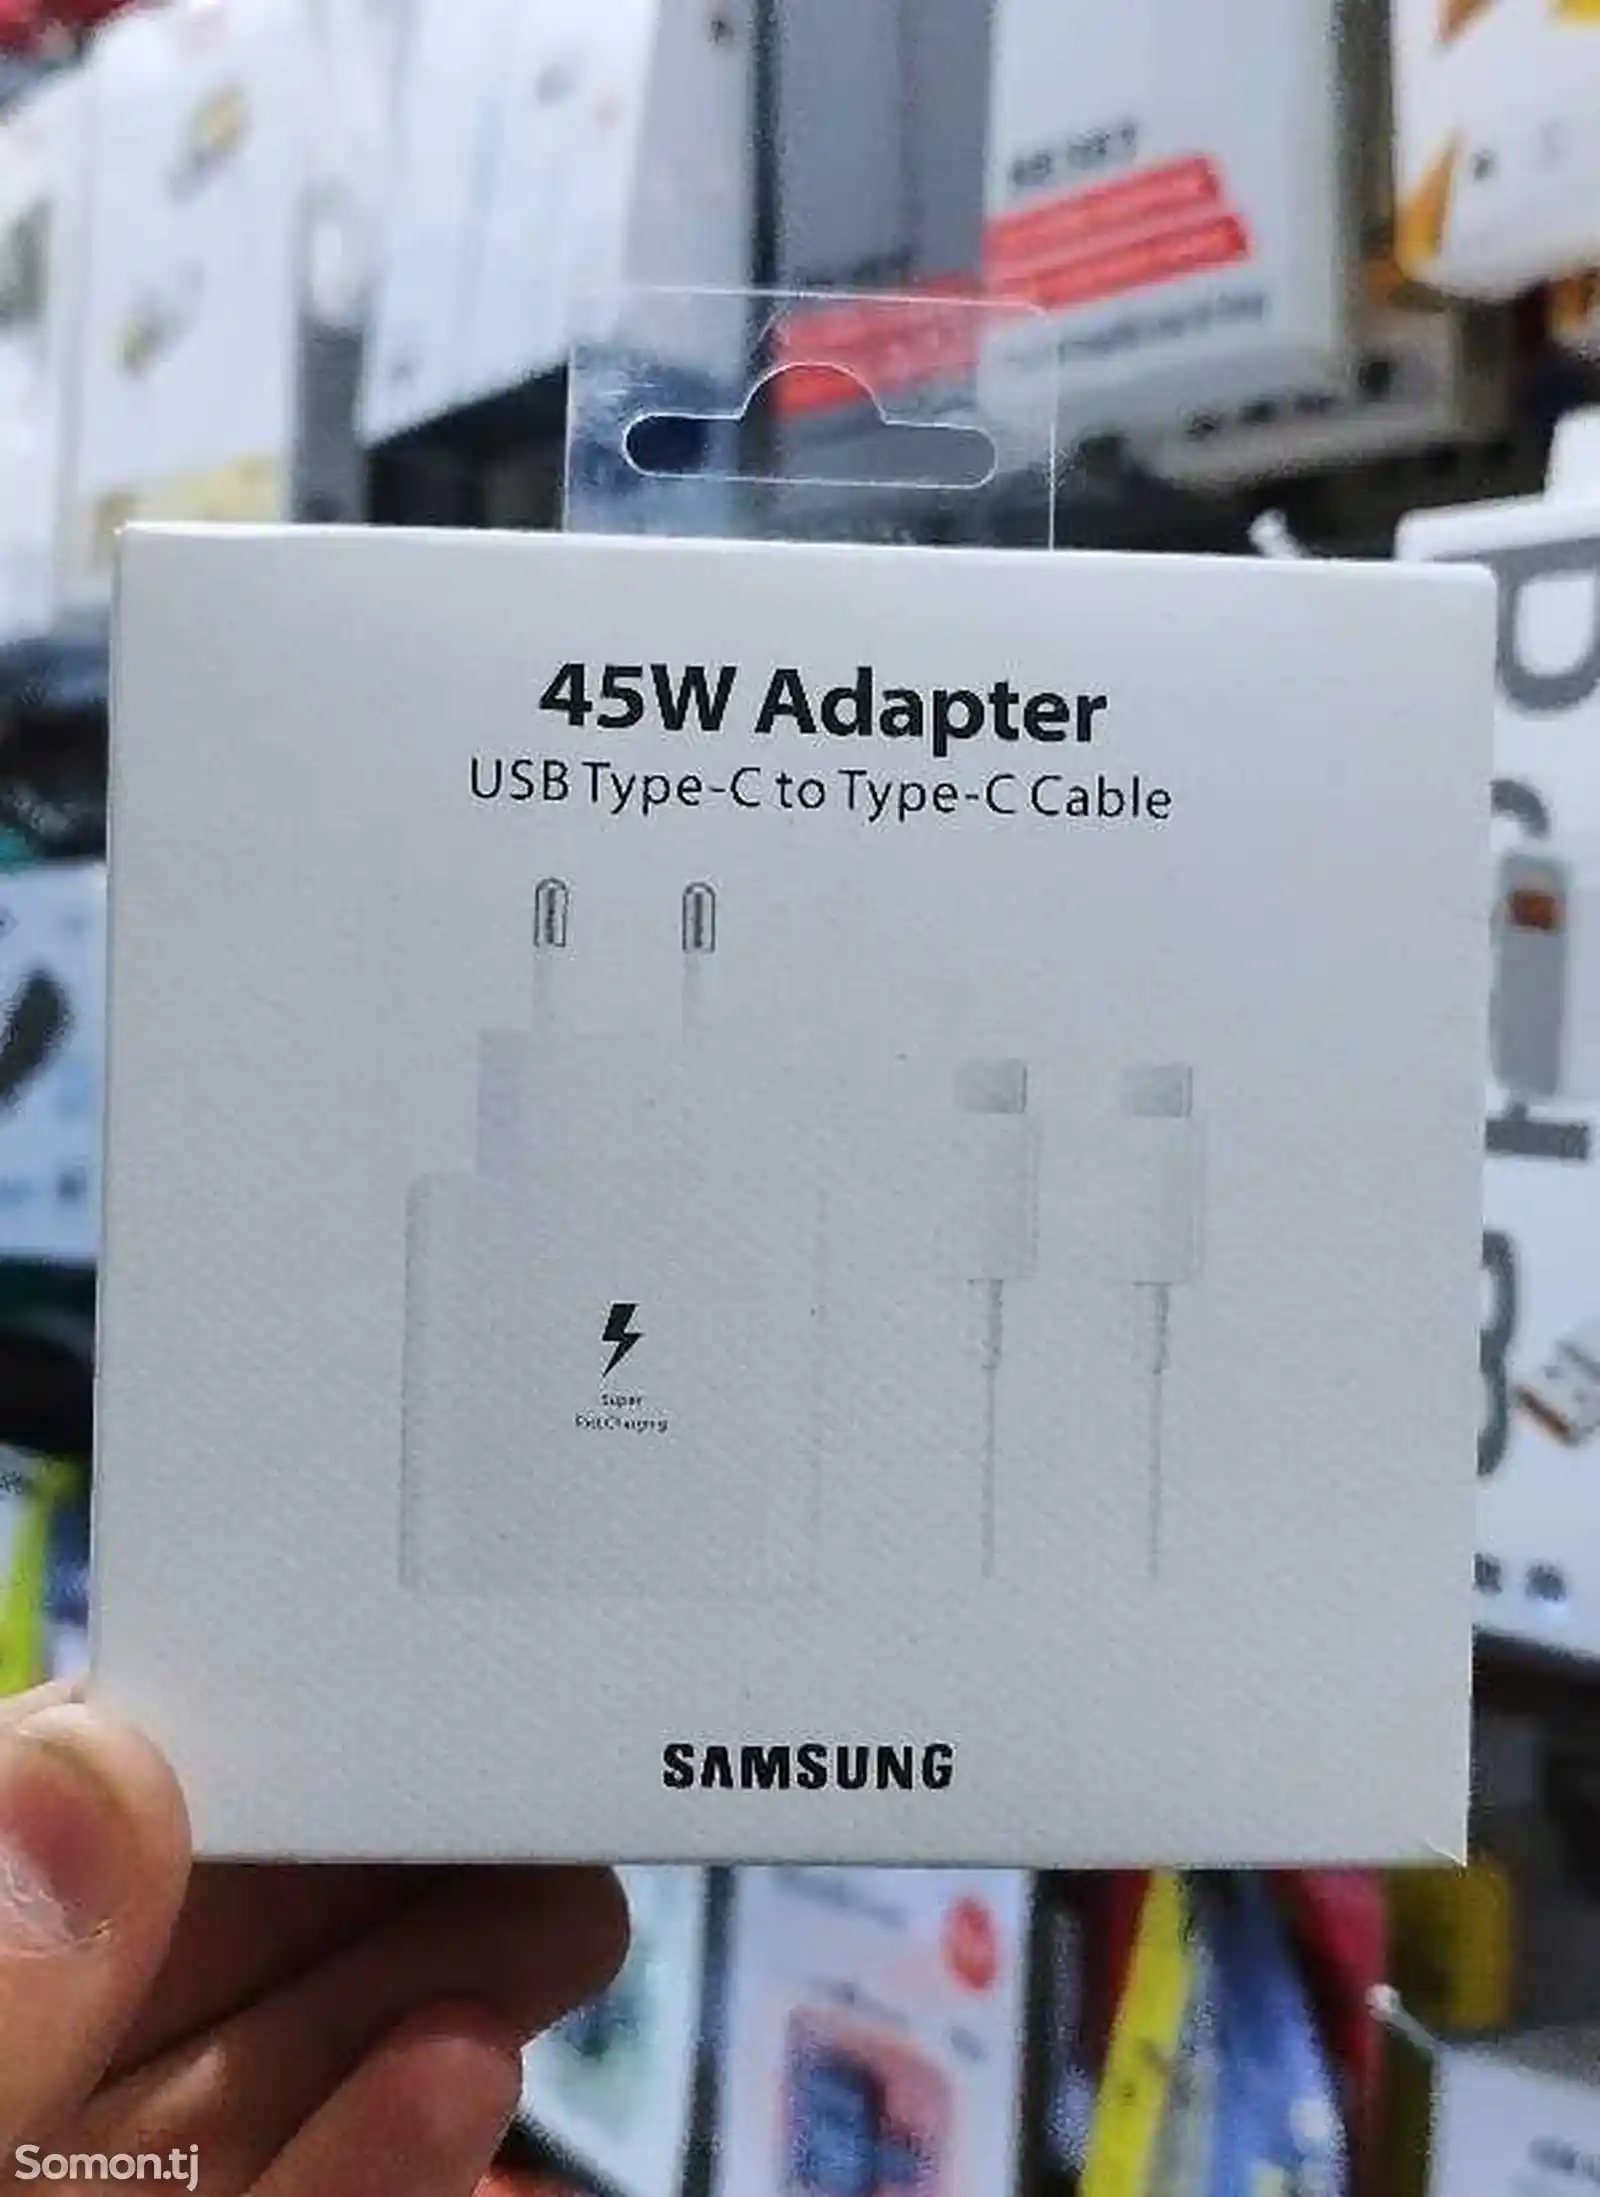 45W Adapter USB Type- C Cable Samsung-1